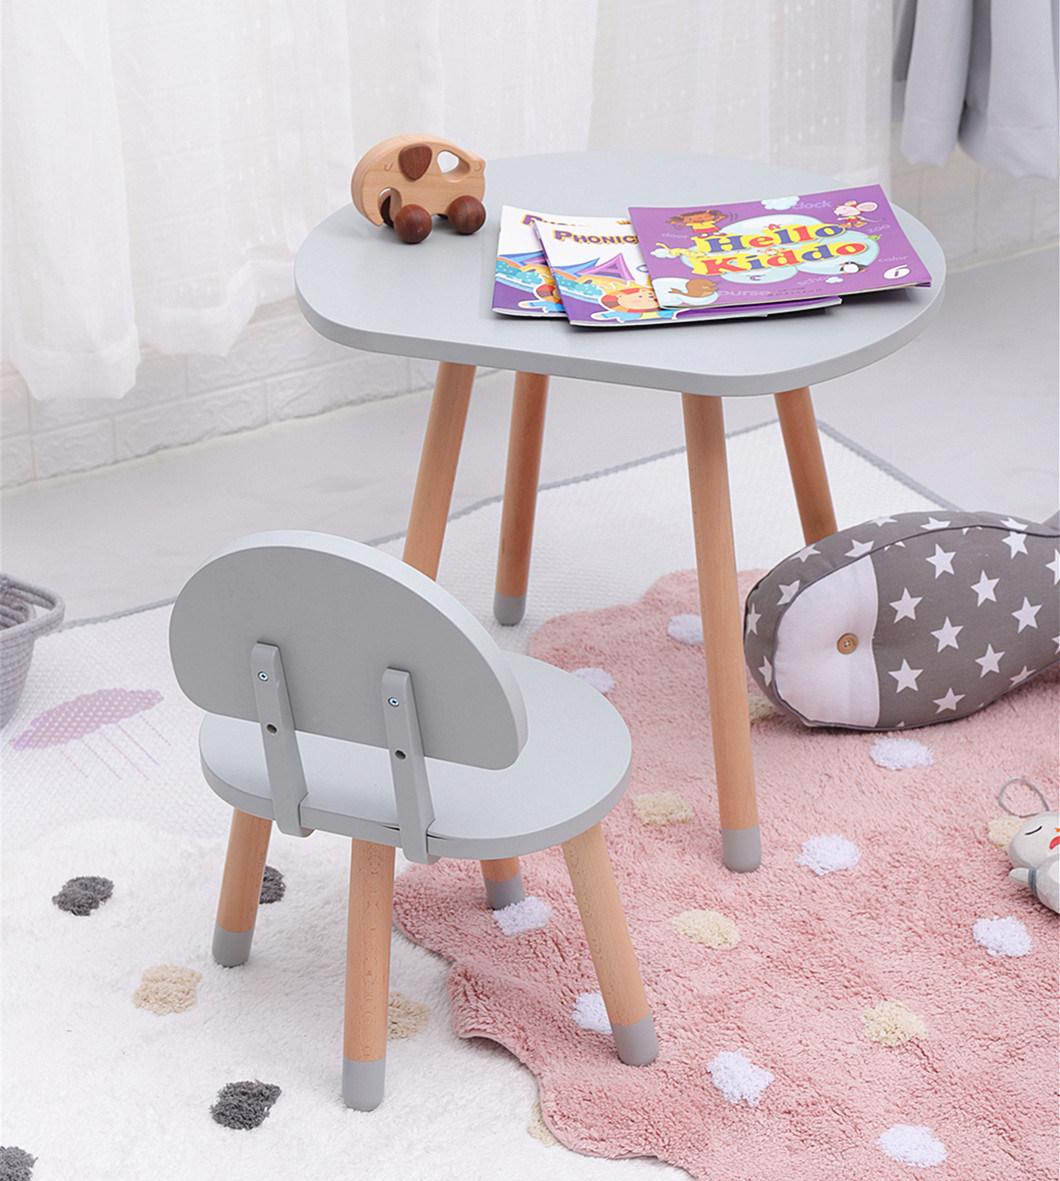 Wooden Cute Children Mushroom Shape Table and Chair Set Kids Home Furniture